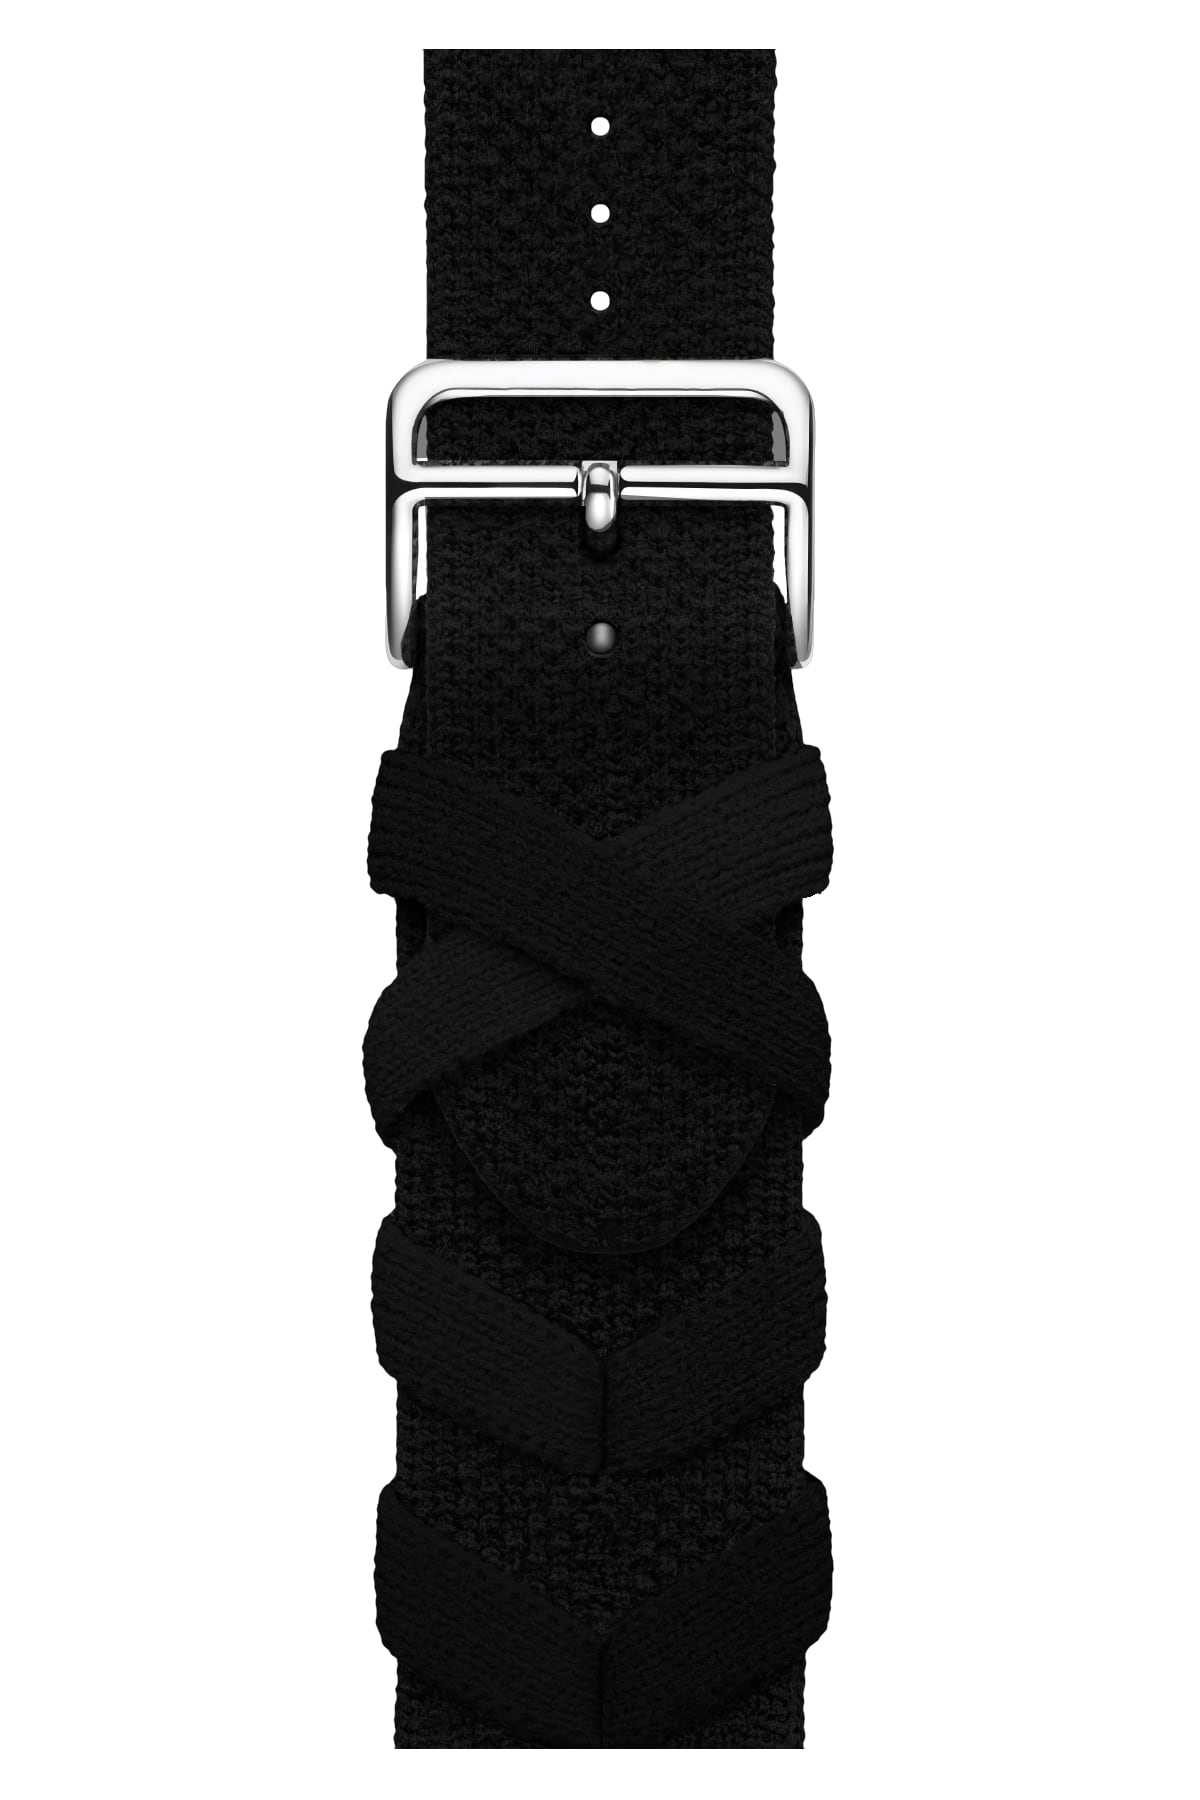 Apple Watch Compatible Basic Loop Knitted Band Sooty 